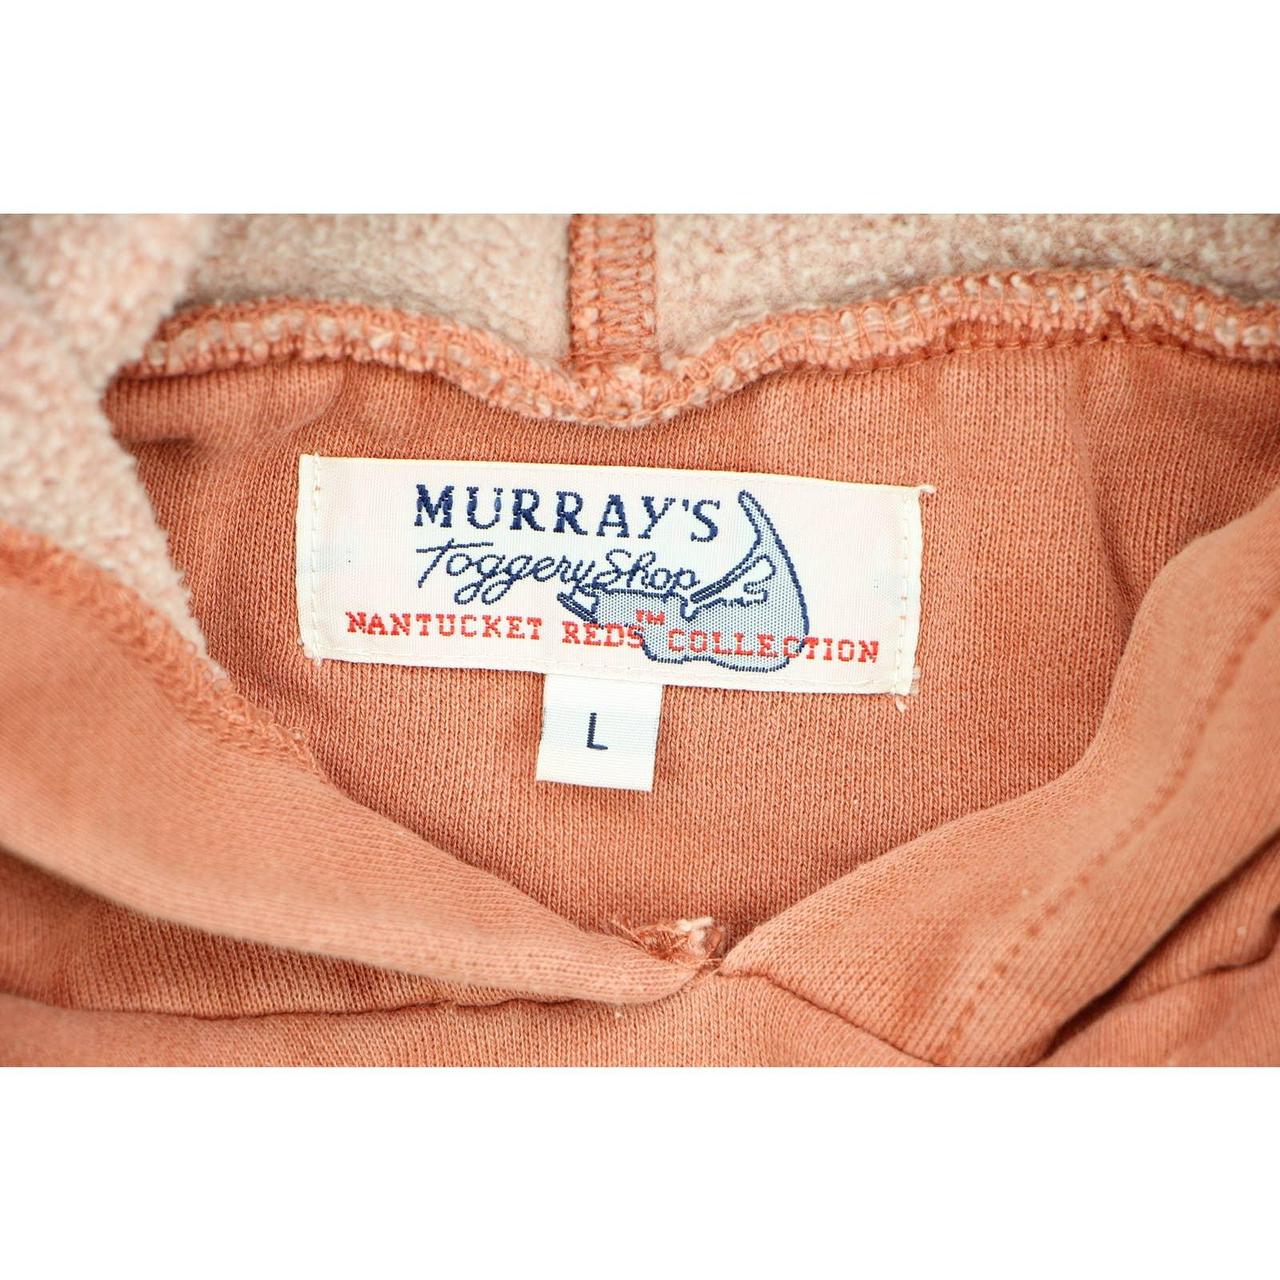 Nantucket Reds® Ladies Jean Pants - Murray's Toggery Shop